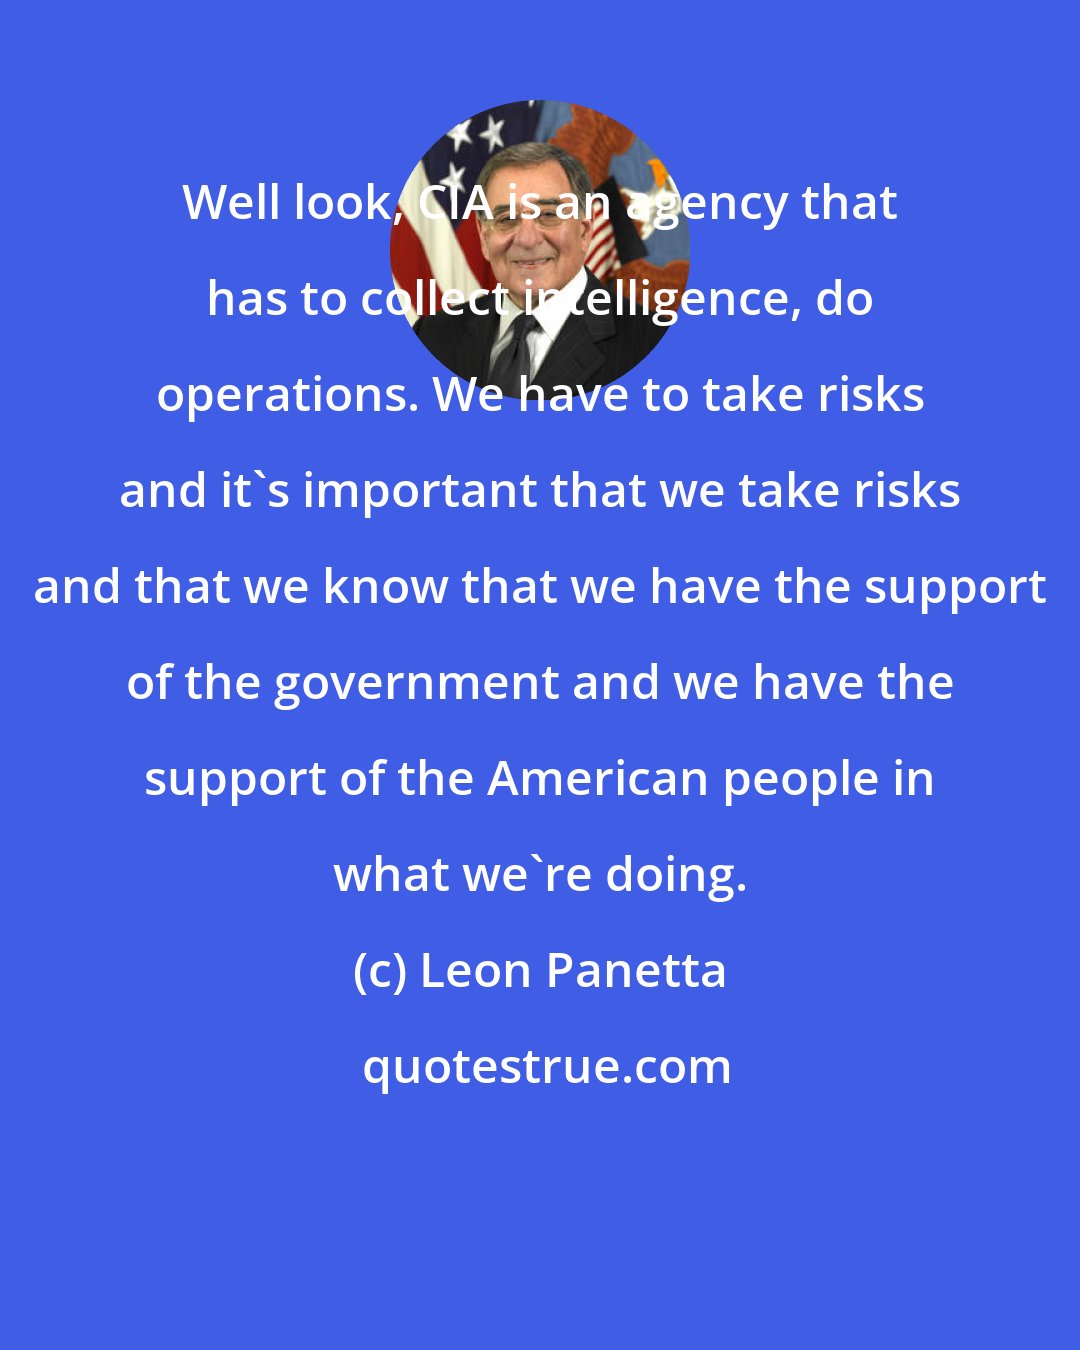 Leon Panetta: Well look, CIA is an agency that has to collect intelligence, do operations. We have to take risks and it's important that we take risks and that we know that we have the support of the government and we have the support of the American people in what we're doing.